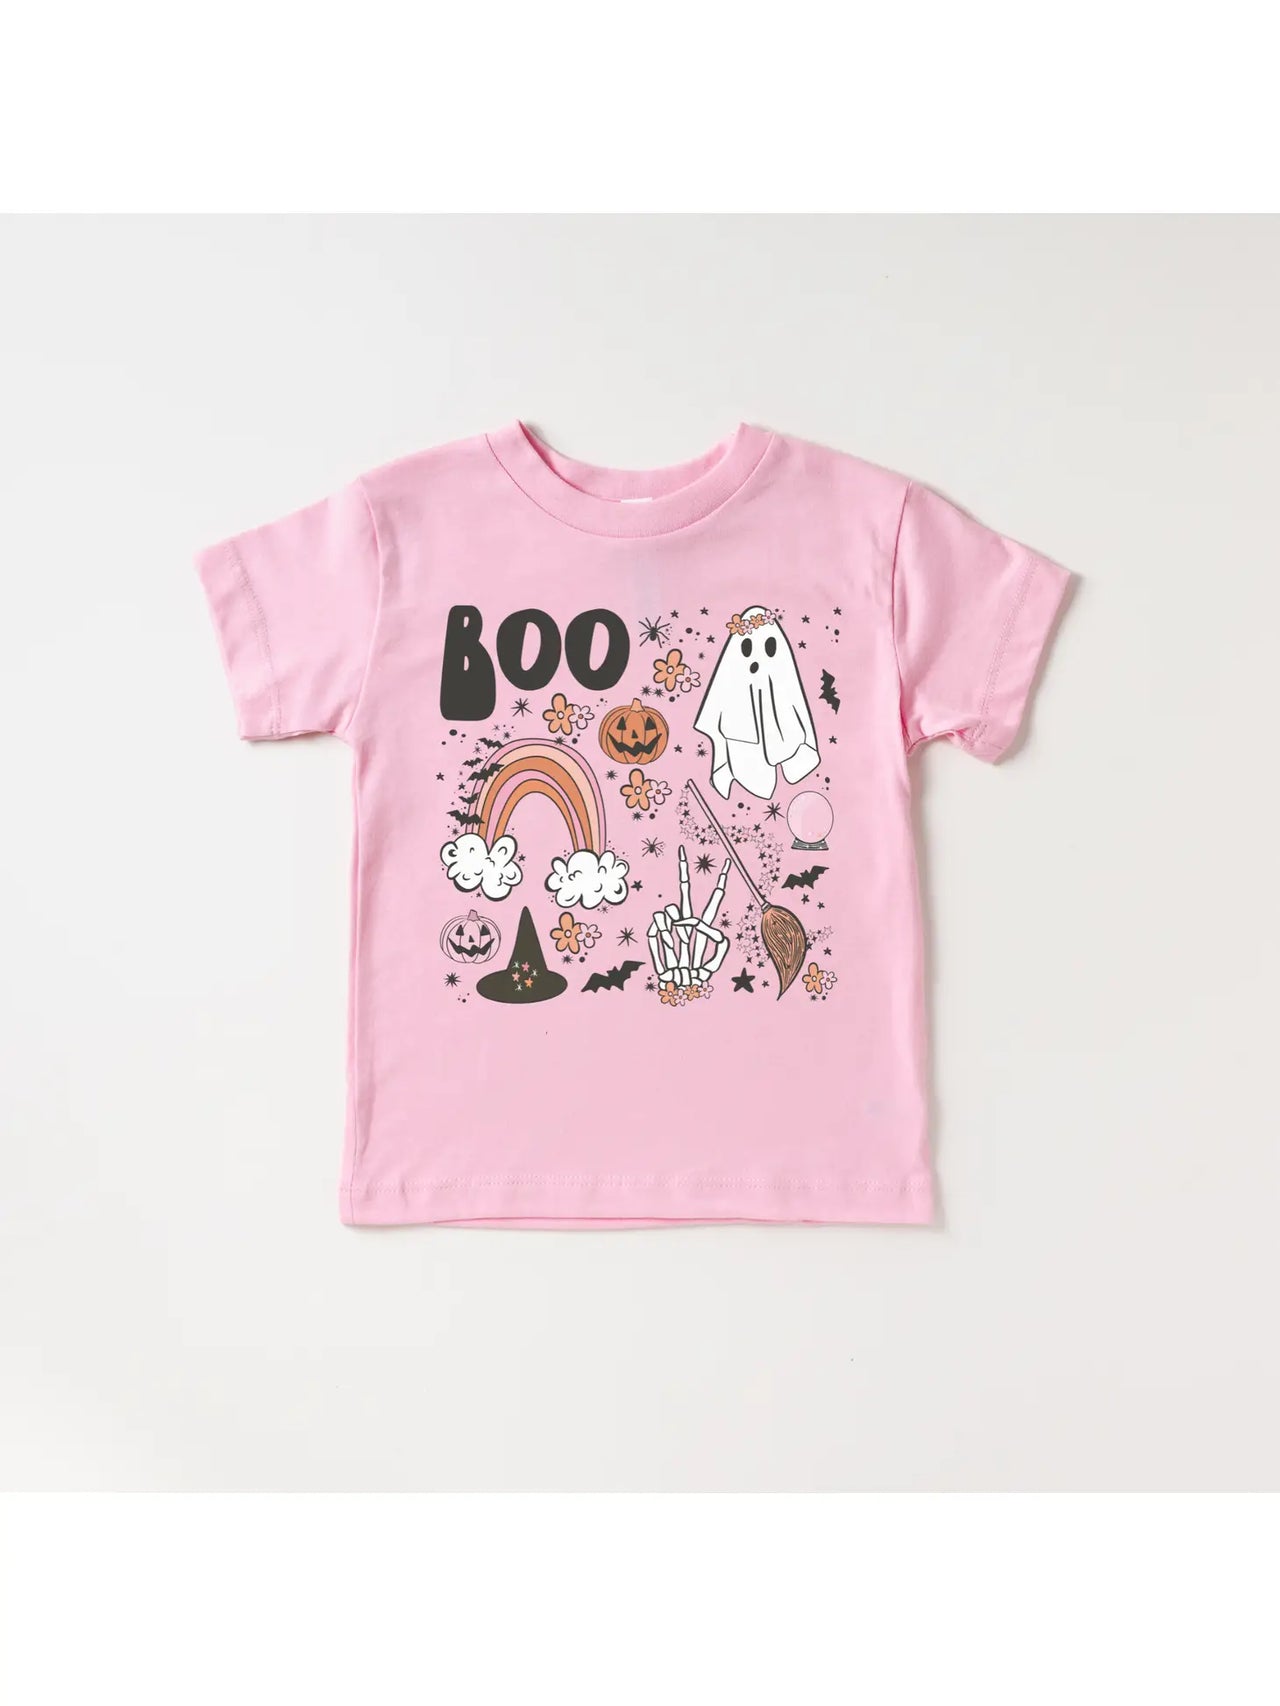 Toddler and Youth T-Shirt || Halloween Favorites Spooky Boo